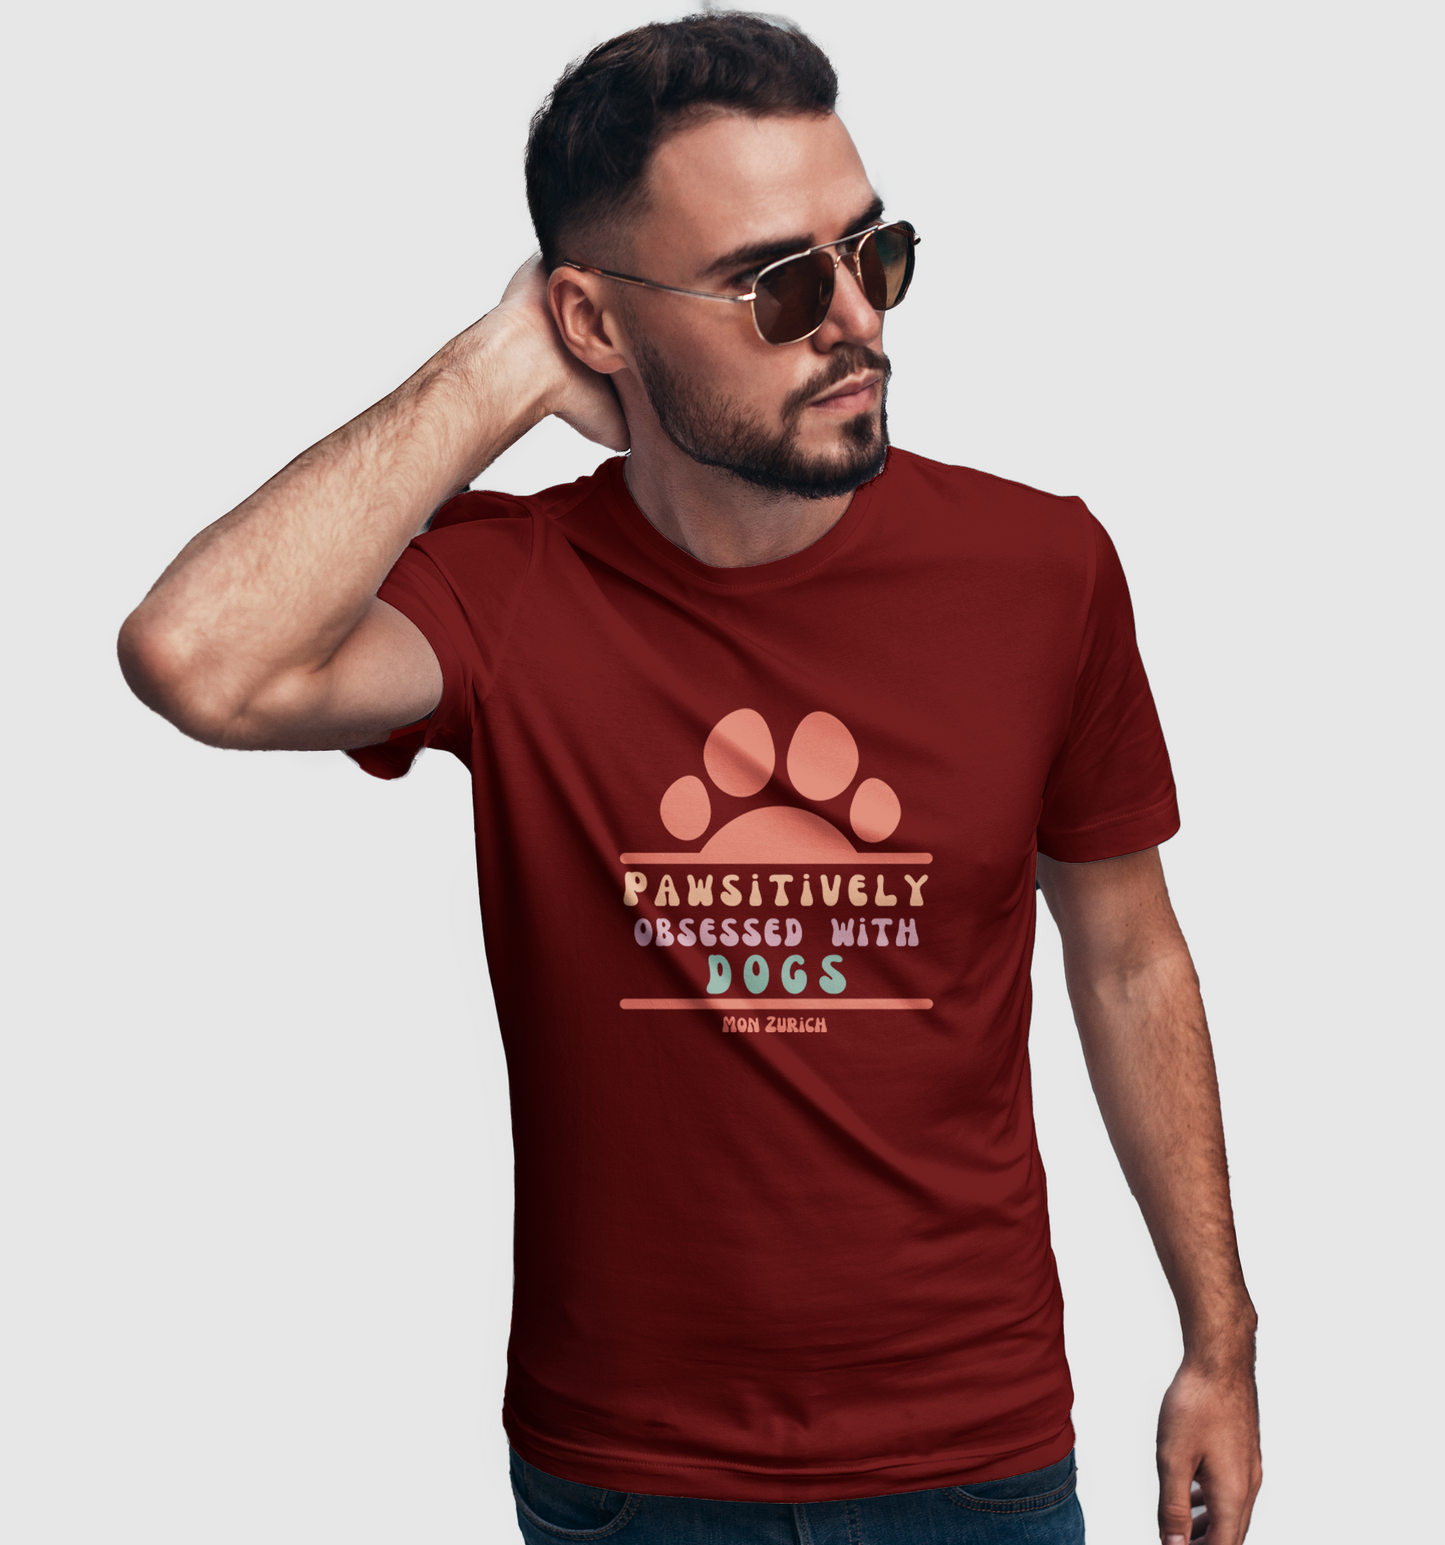 Pawsitively Obsessed With Dogs T-Shirt In Dark - Mon Zurich Originals